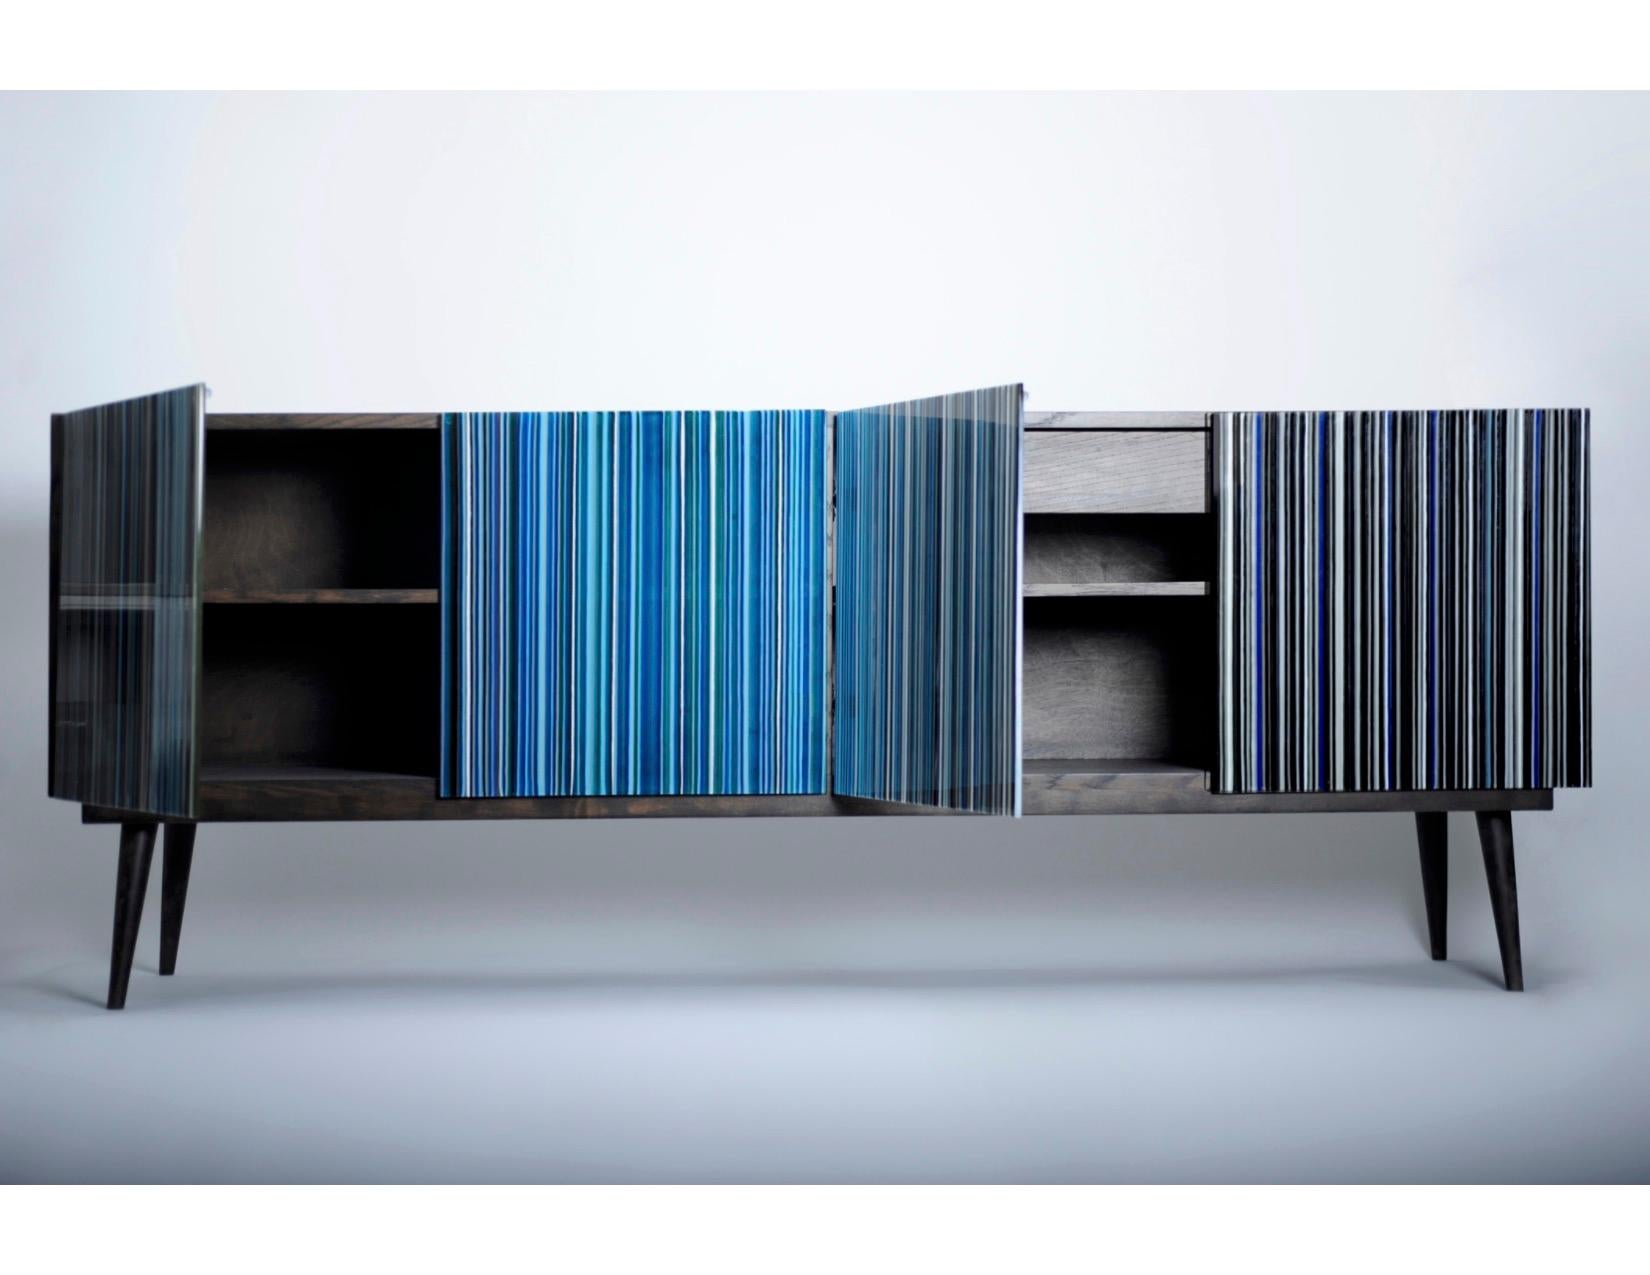 The Buff-Heyyy is a retro-style credenza designed by Orfeo Quagliata in collaboration with Taracea Furniture. An object of fused glass created with the exclusive barcode technique. The Buff-Heyyy´s retro design mixed with the designer's exceptional